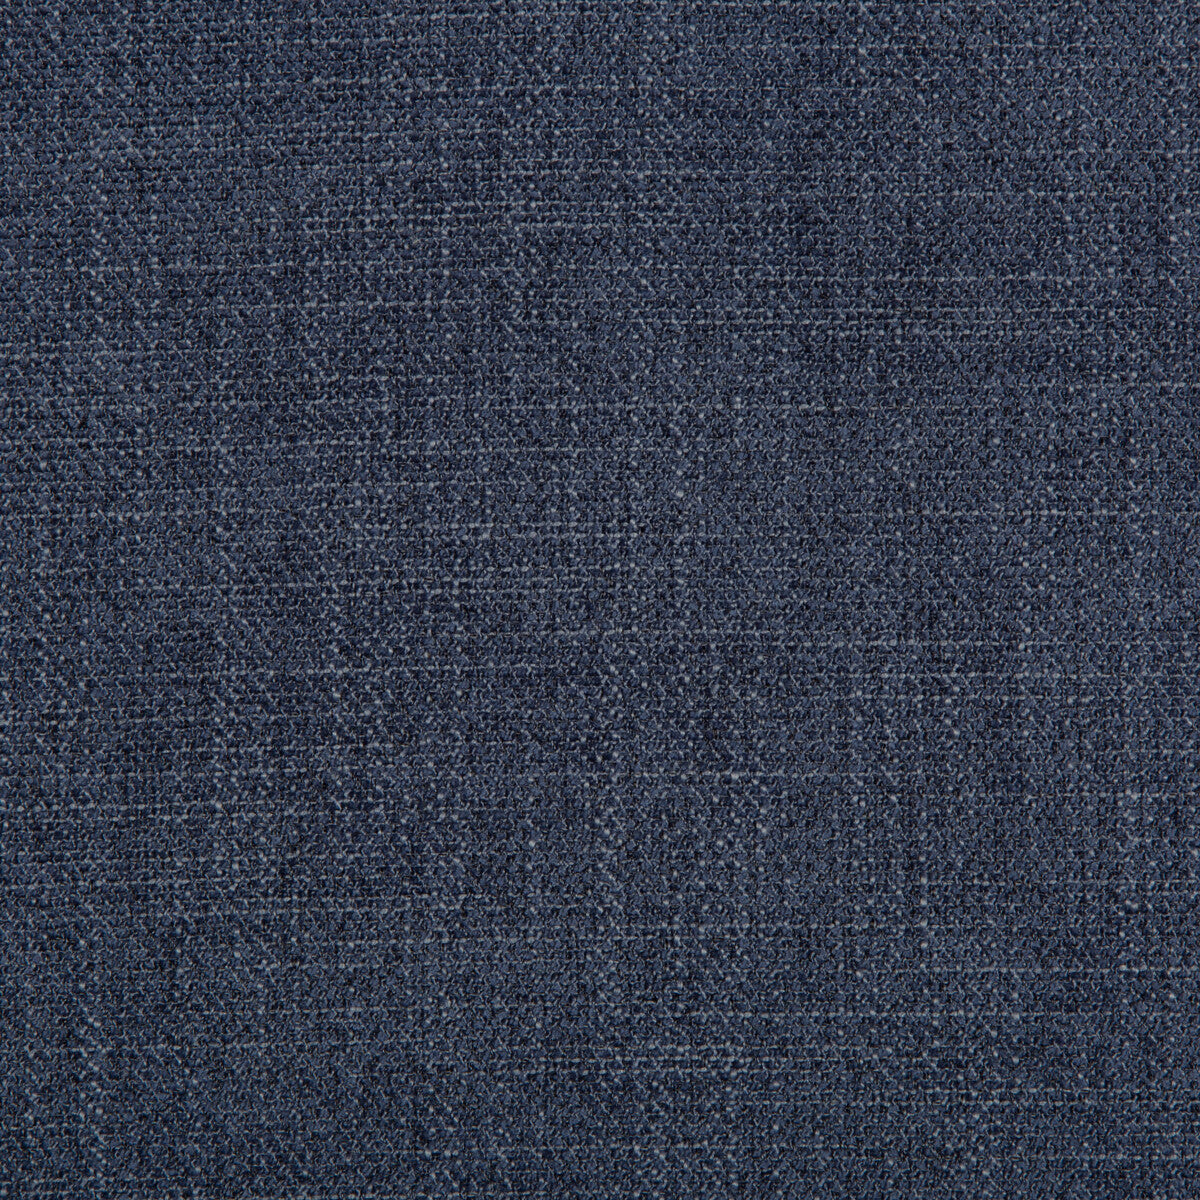 Kravet Contract fabric in 35404-5 color - pattern 35404.5.0 - by Kravet Contract in the Crypton Incase collection